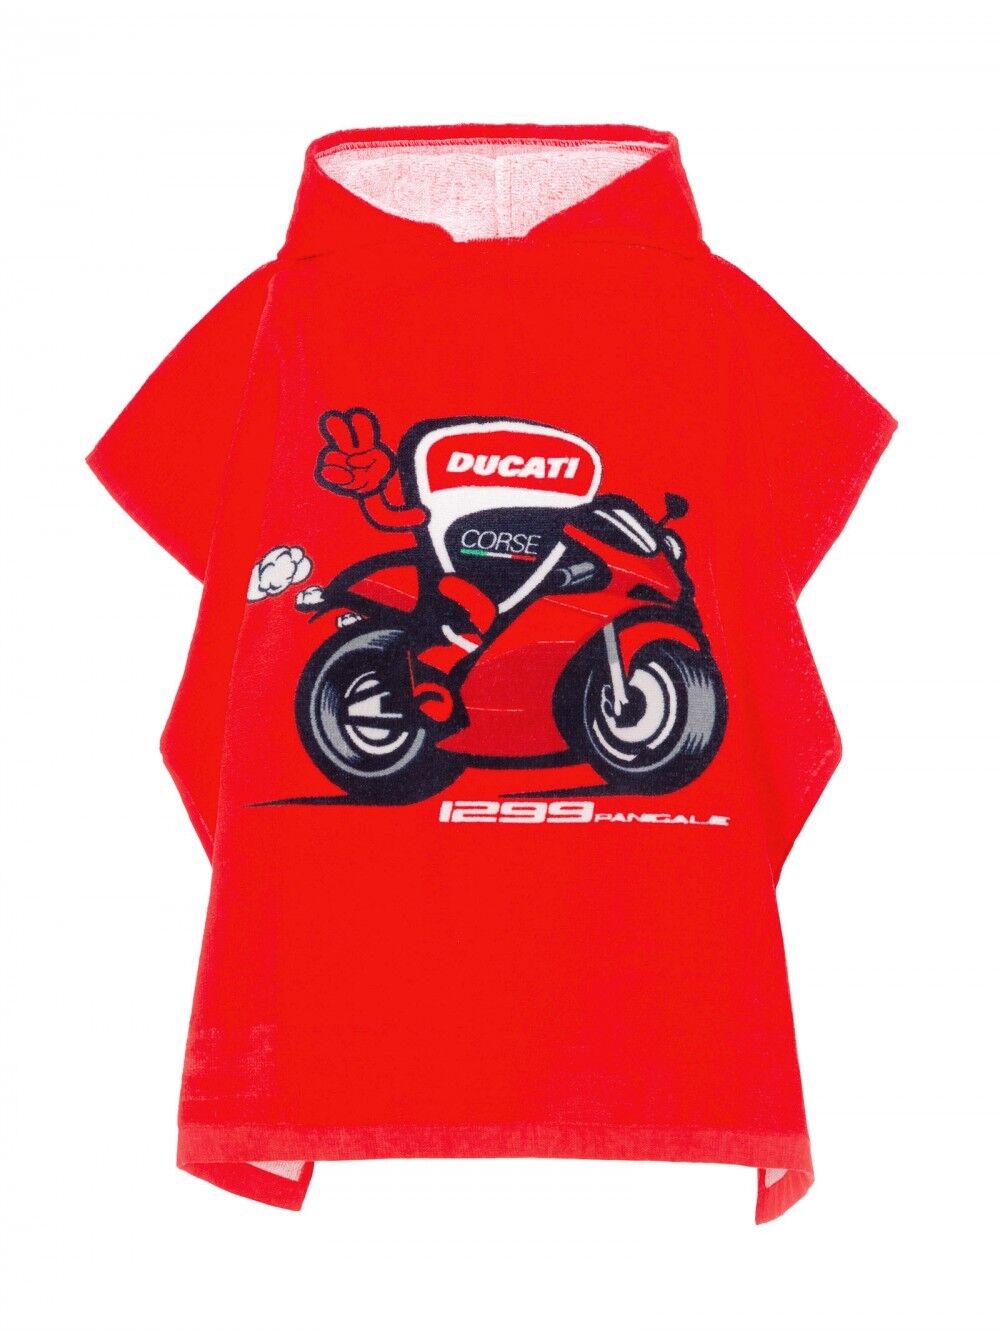 Official Ducati Corse Kid's Poncho Towel - 18 56005